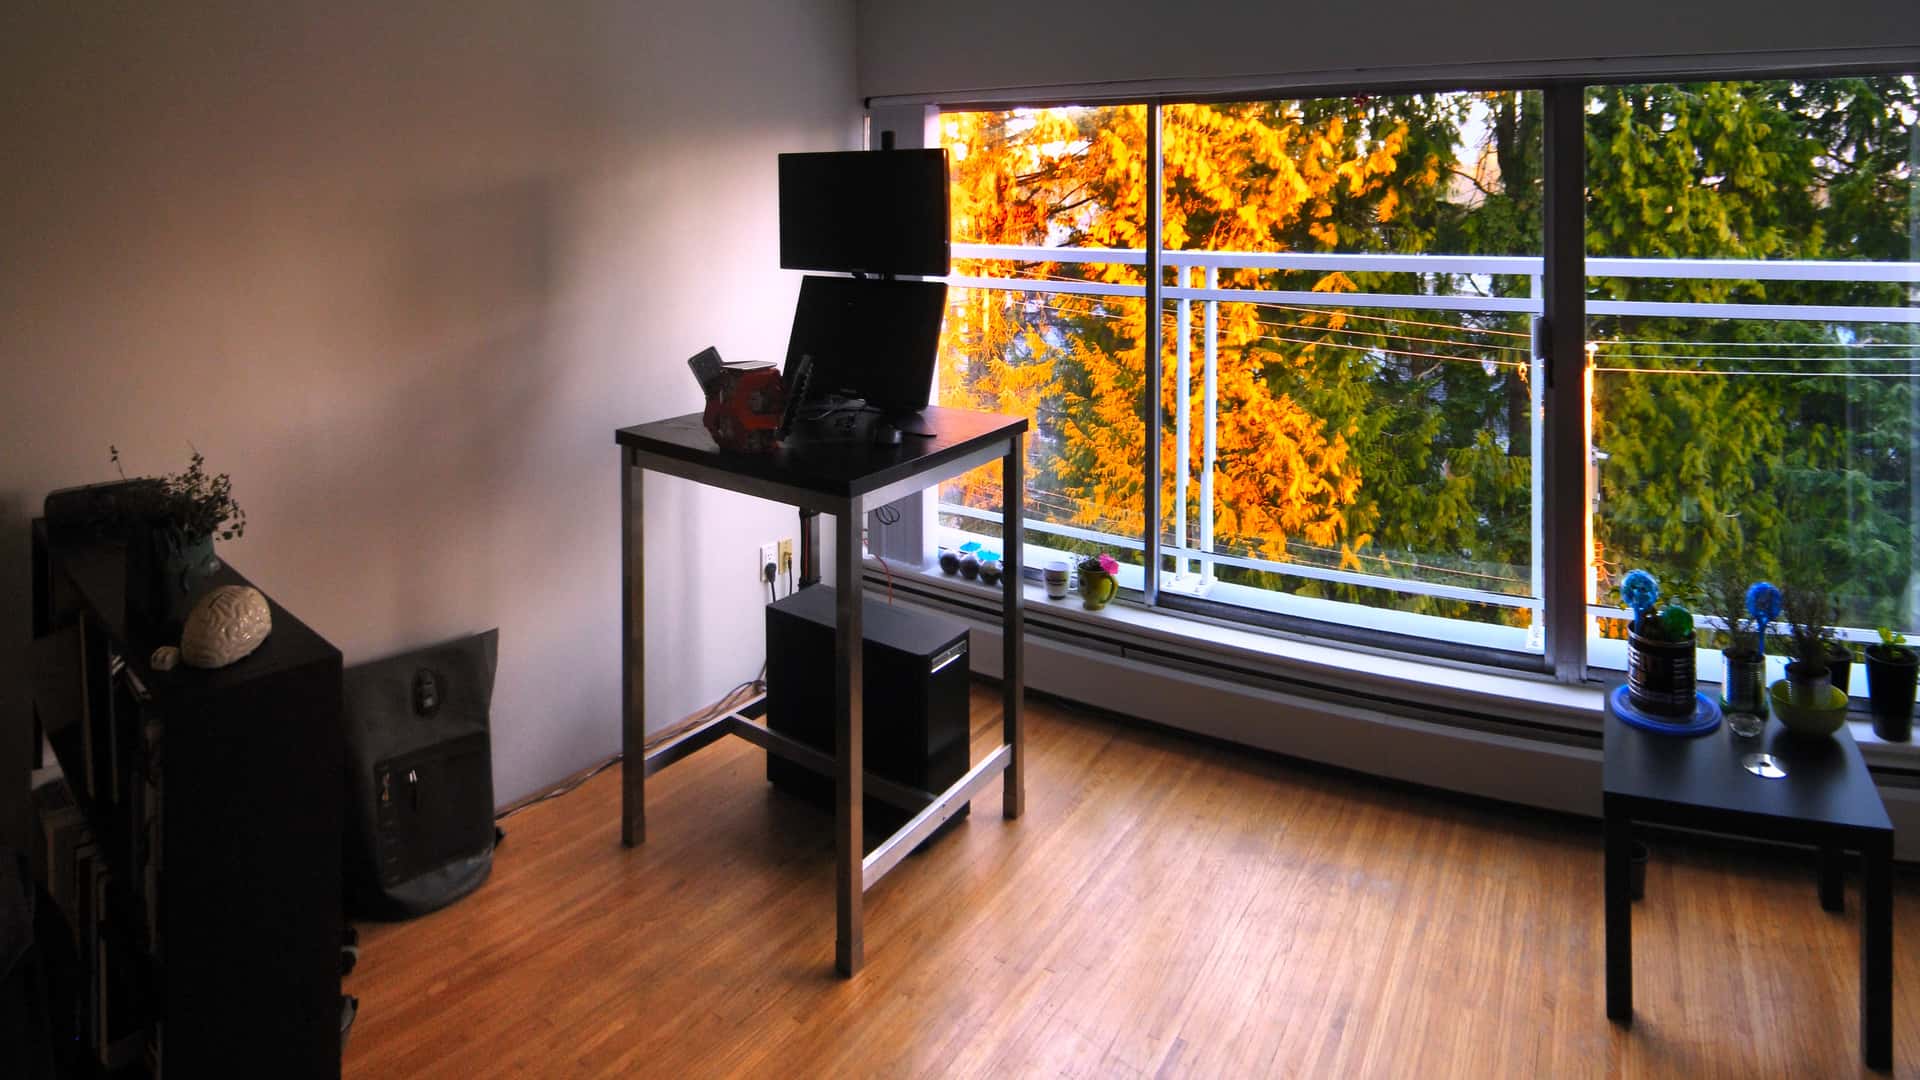 standing desk in front of a window to fir trees cast orange by morning sunshine